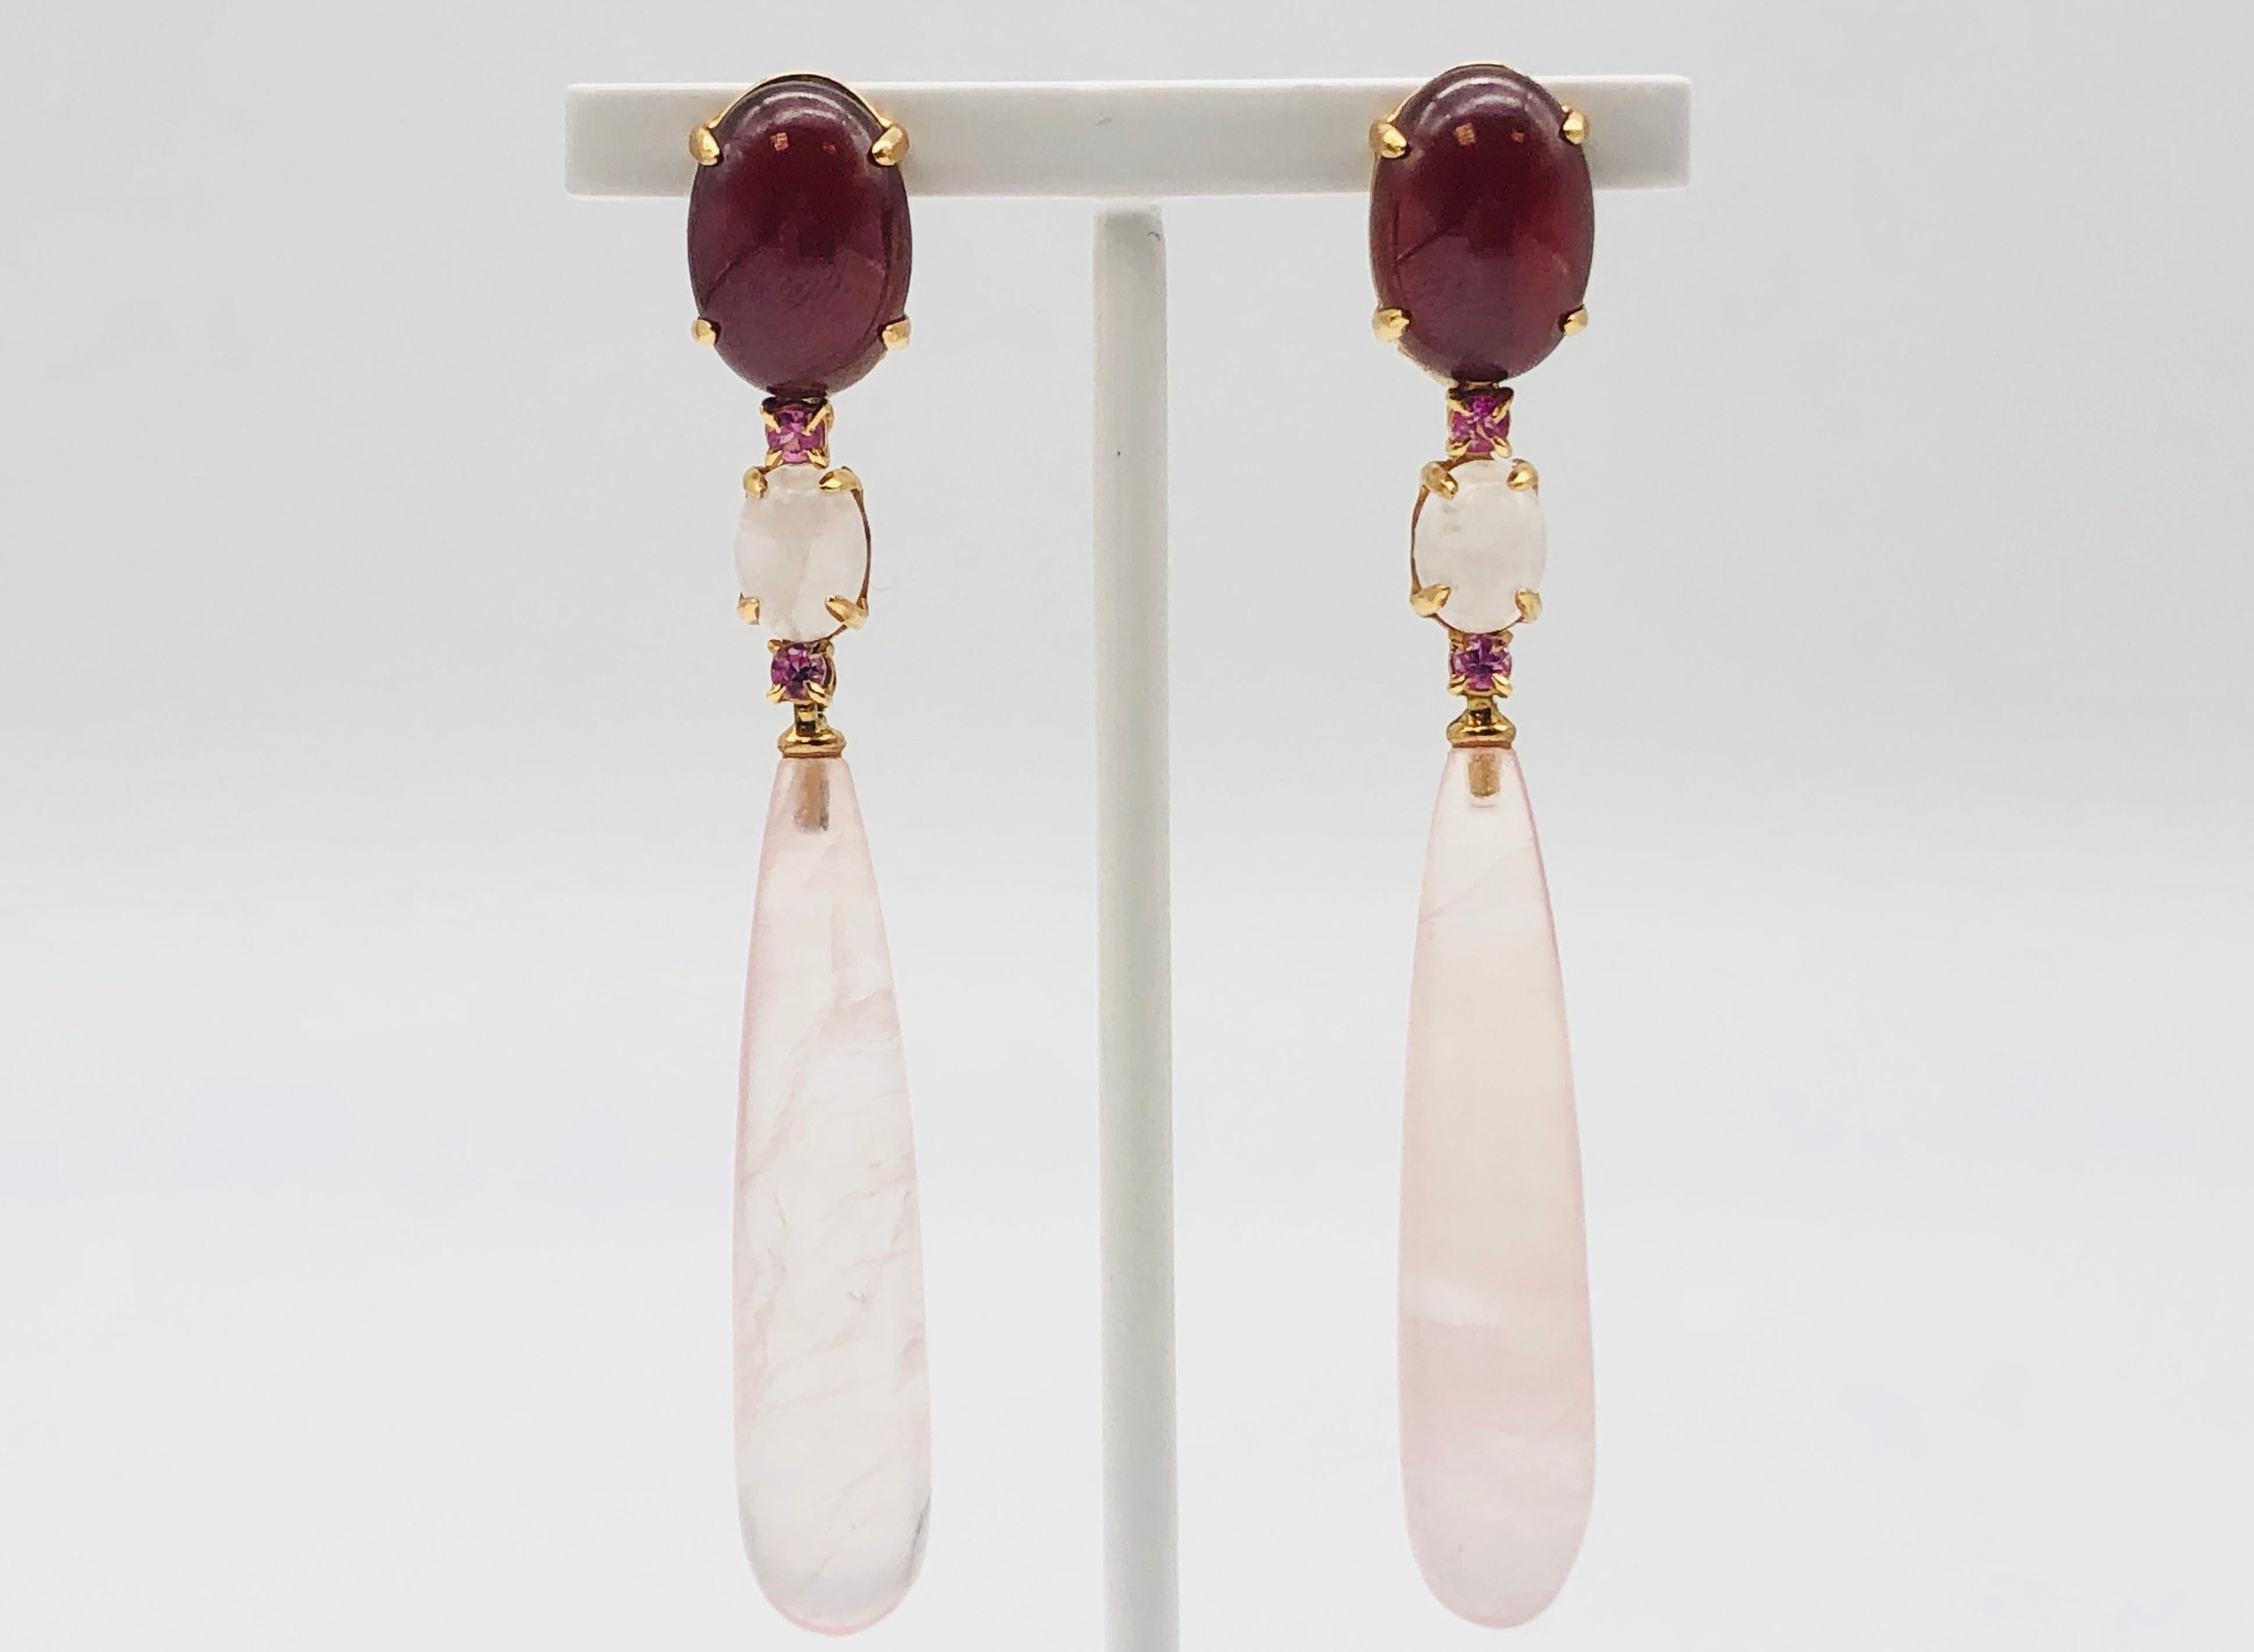 Discover these enchanting chandelier earrings in 18-carat yellow gold, embellished with rose quartz and pink topaz. Not only are they enchantingly beautiful, they also offer exceptional comfort thanks to their light weight.

The choice of 18-carat